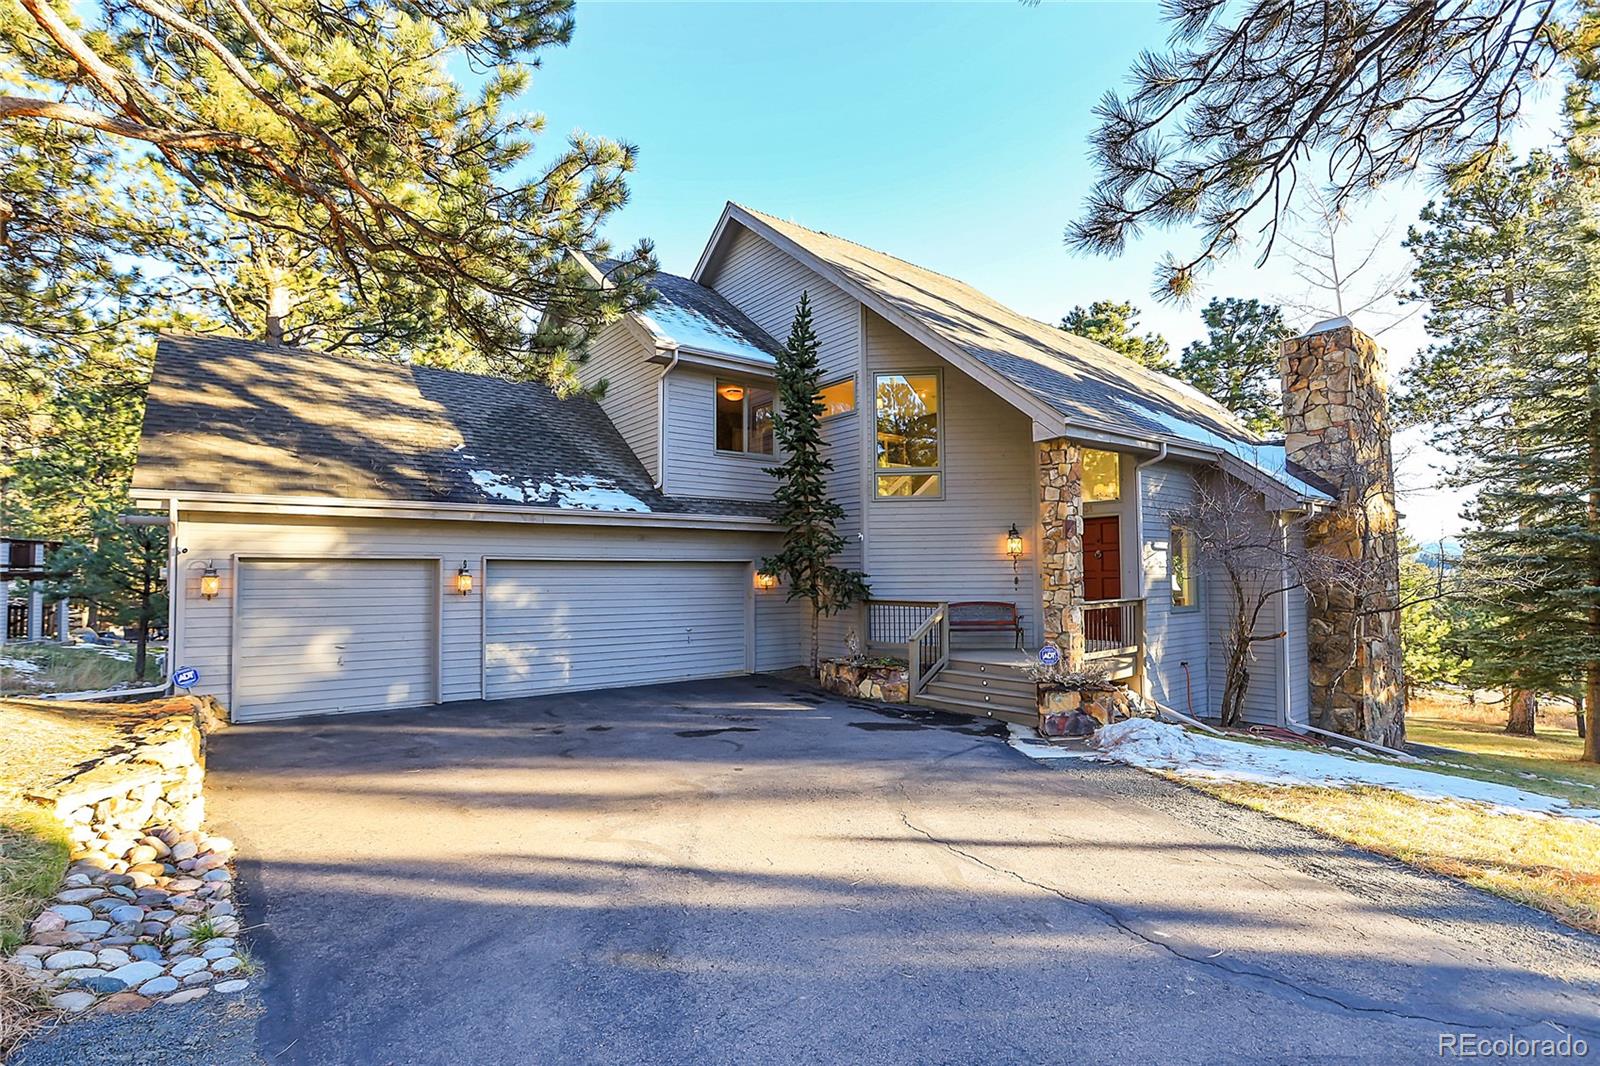 31336  burn lane, evergreen sold home. Closed on 2024-01-16 for $1,388,000.